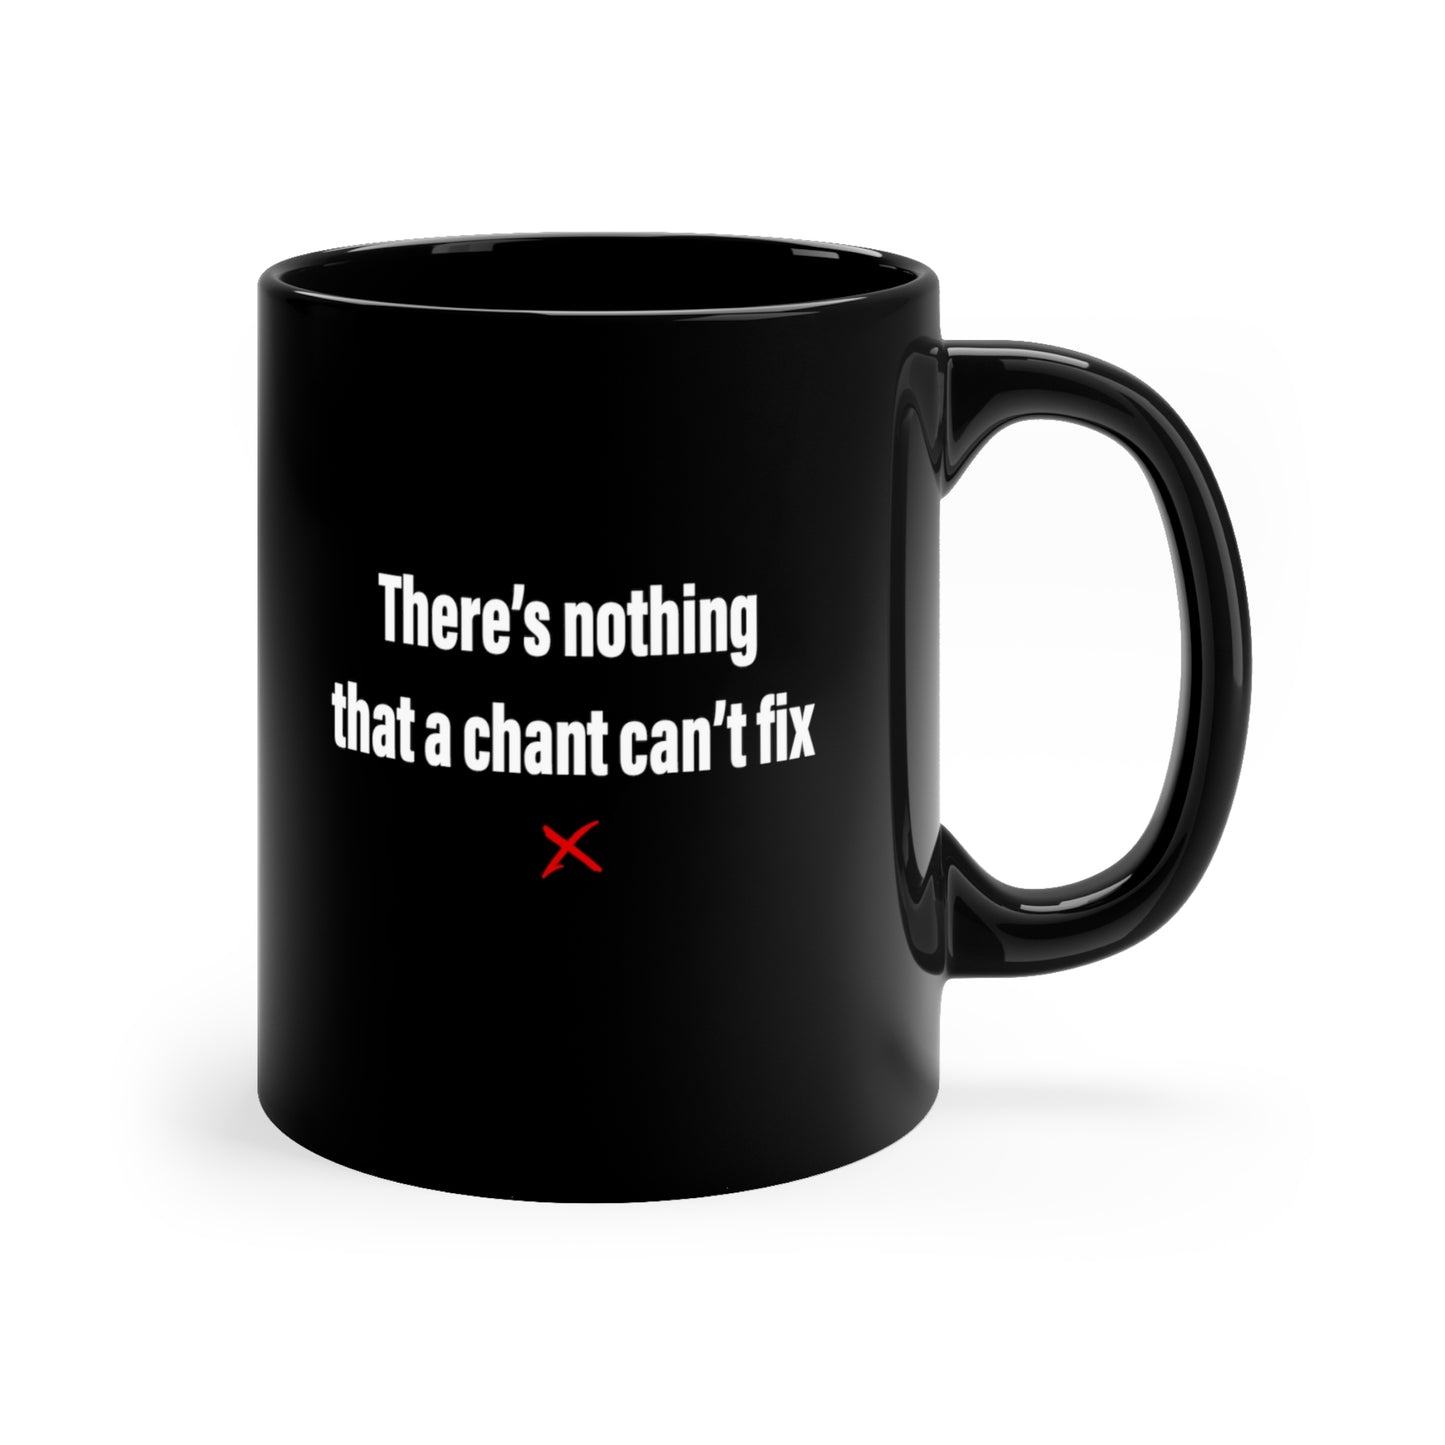 There's nothing that a chant can't fix - Mug